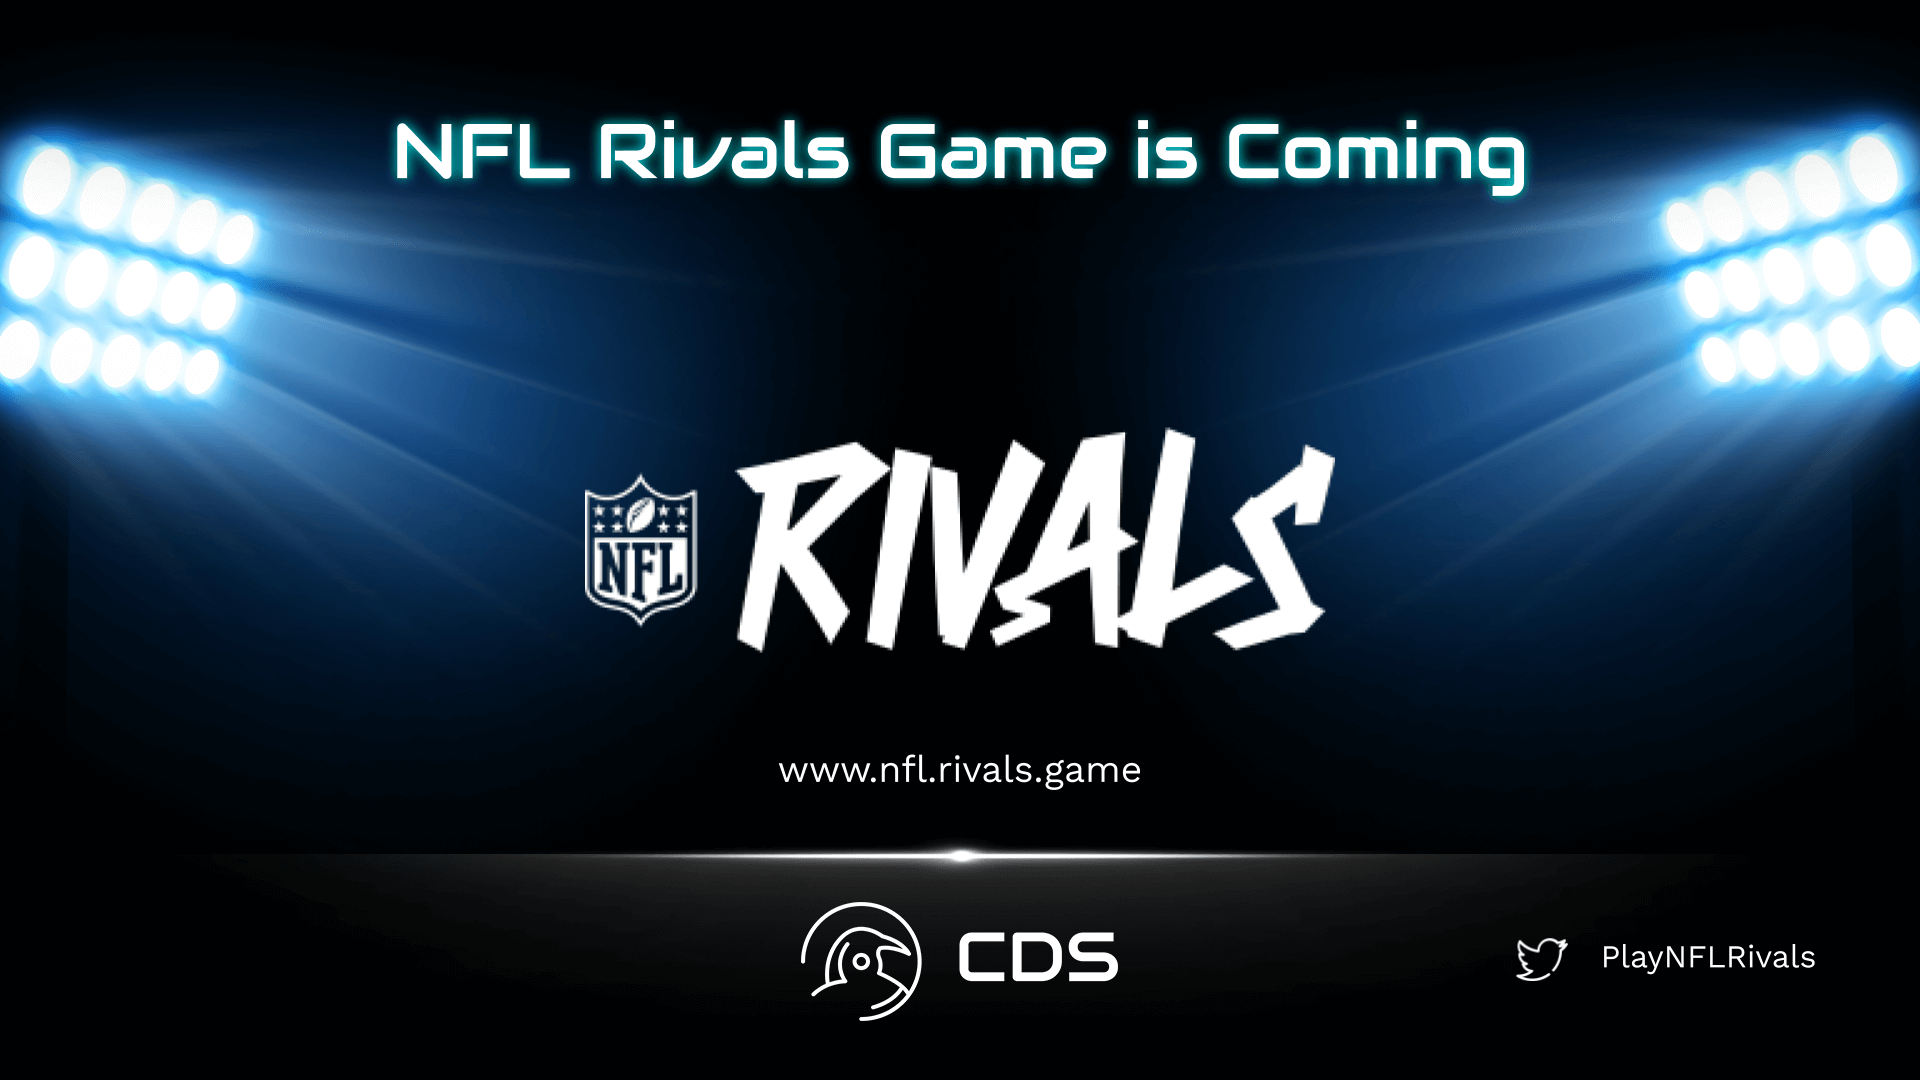 NFL Rival game is coming